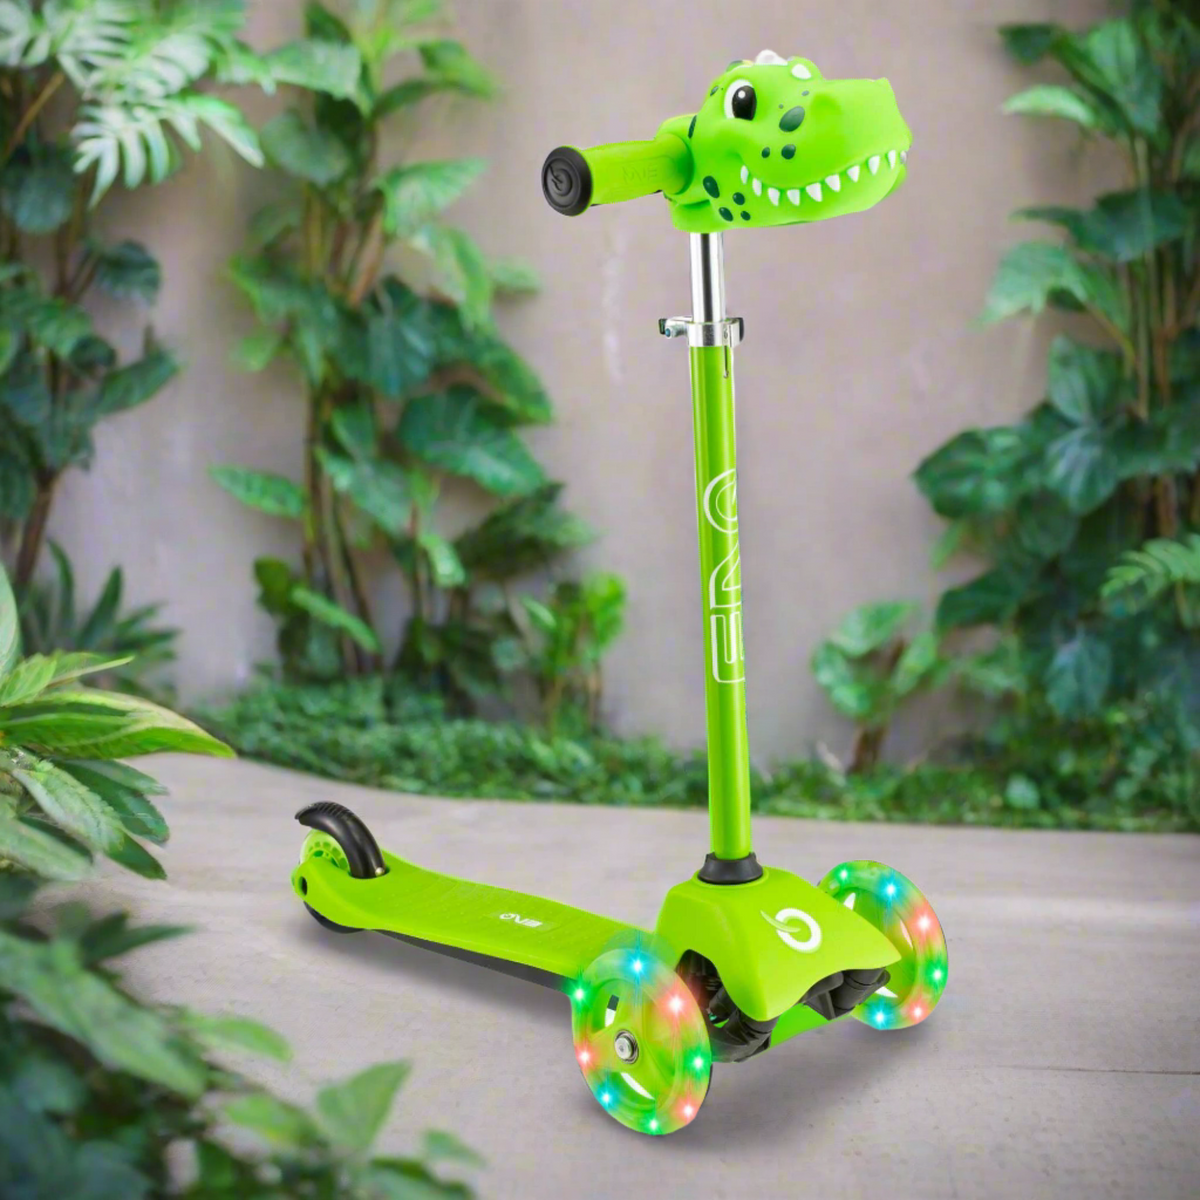 EVO Mini Cruiser Scooter , featuring a stable light up three-wheel design, adjustable handlebars, and lightweight, durable construction, perfect for young children’s outdoor adventures.